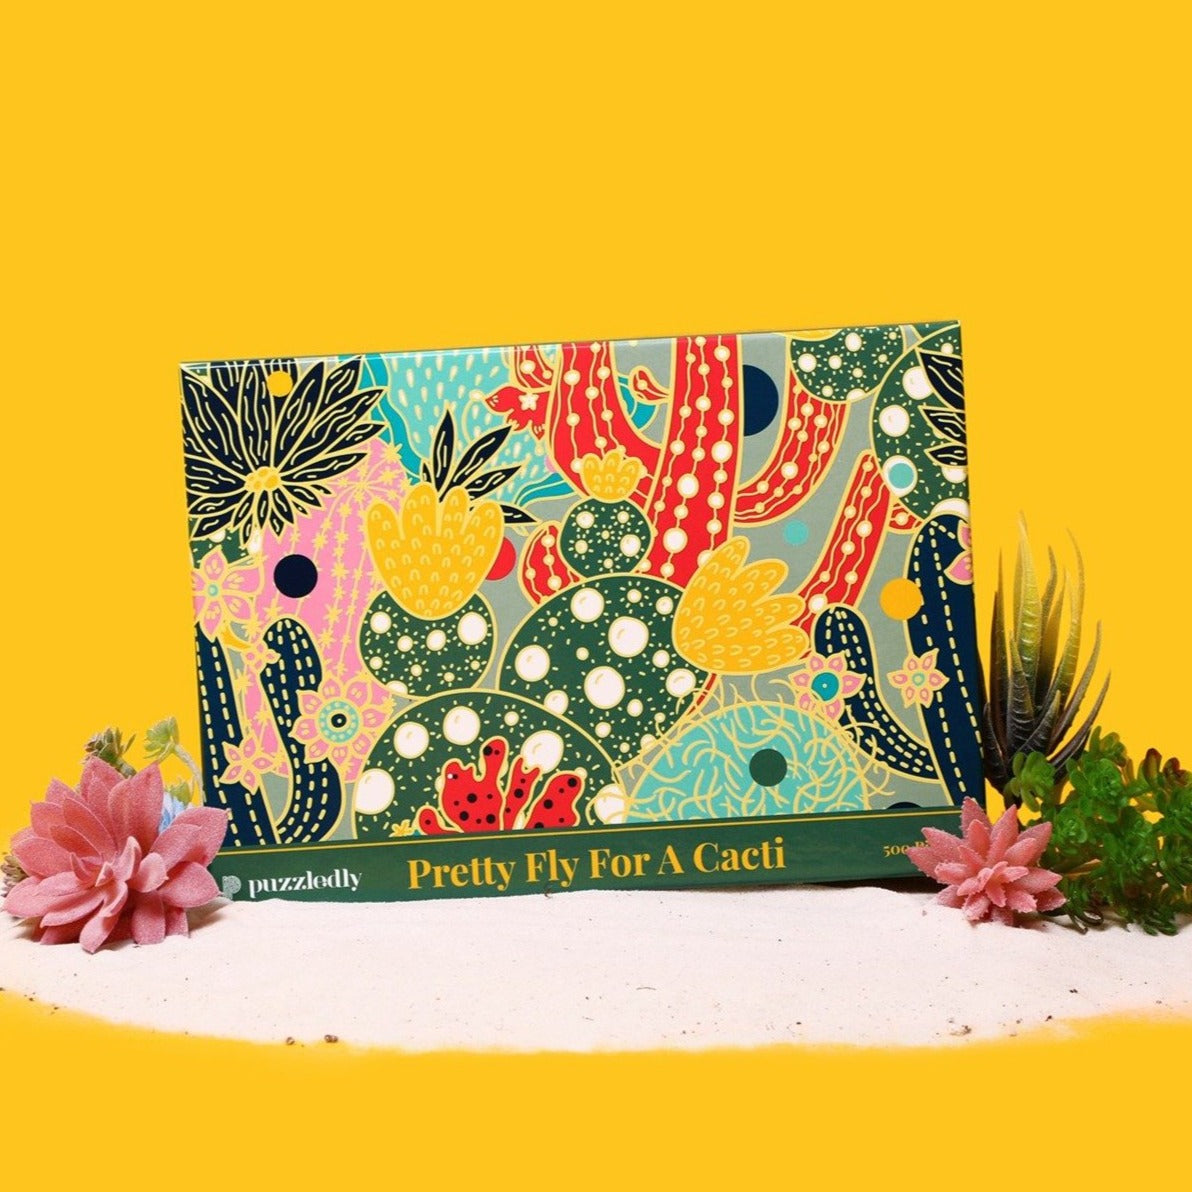 Pretty Fly For A Cacti | 500 Piece Jigsaw Puzzle Puzzledly Puzzledly.